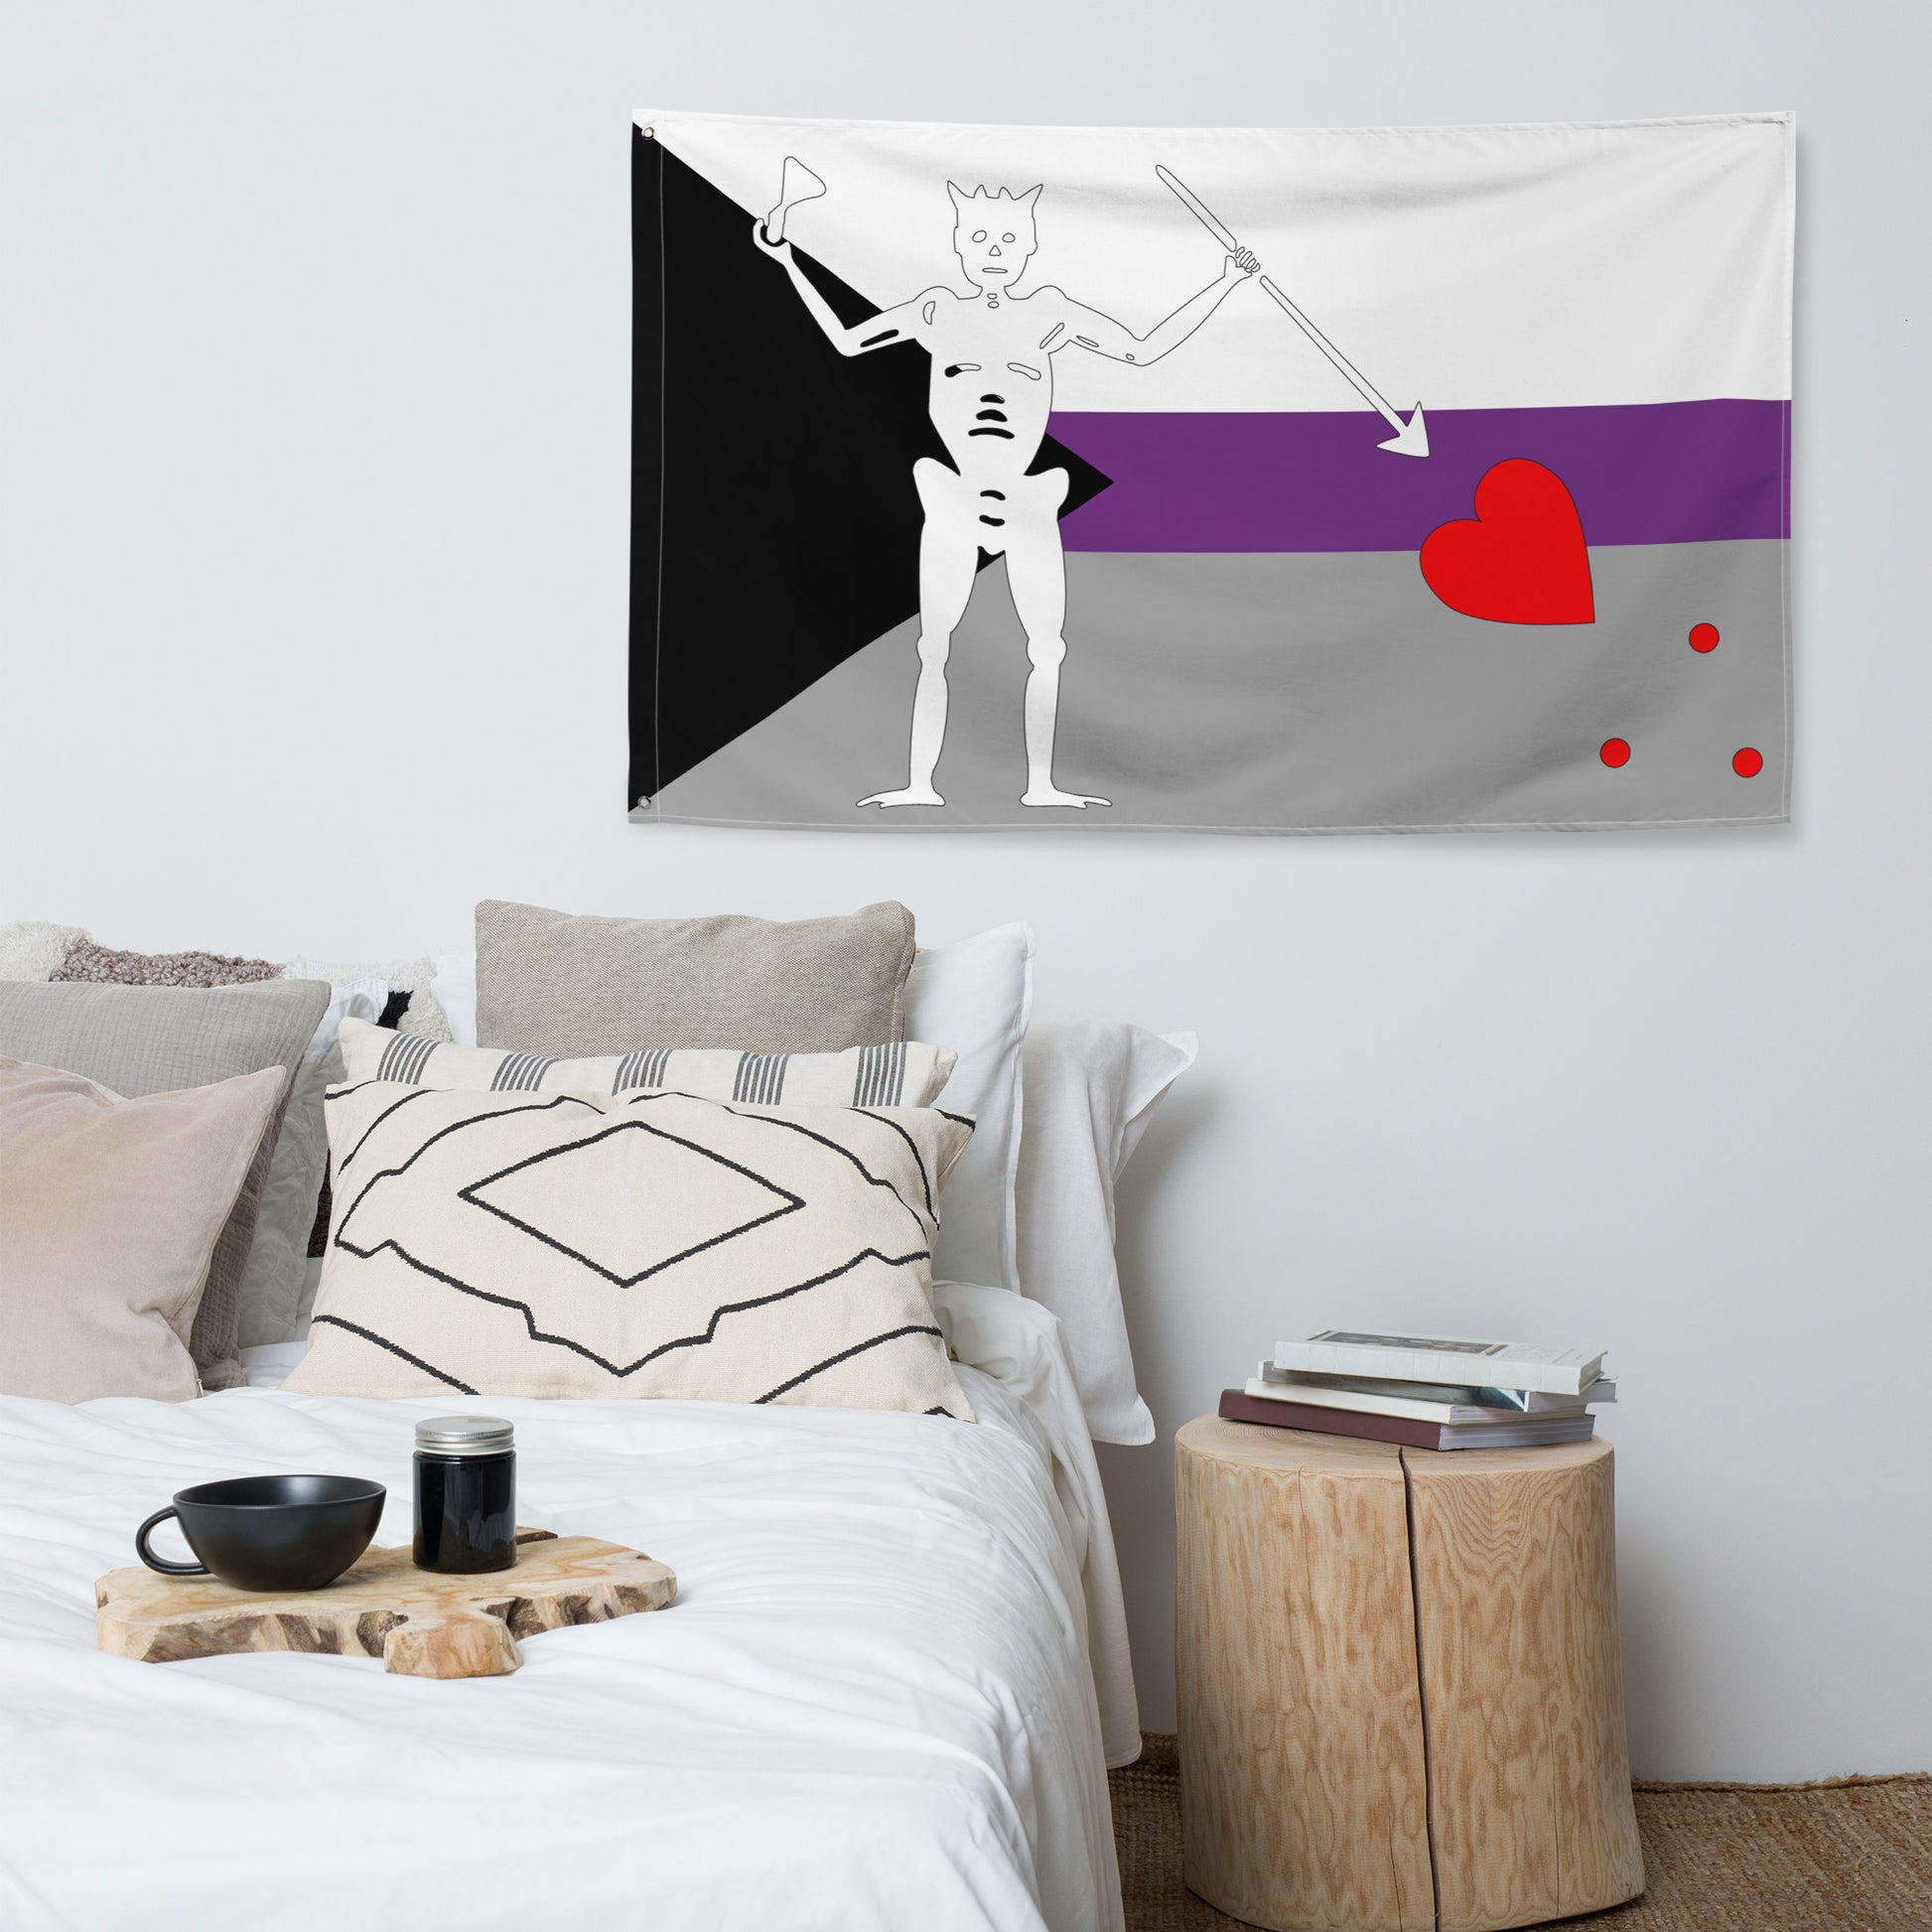 the demisexual blackbeard pride flag hanging on a white wall above a bed and side table